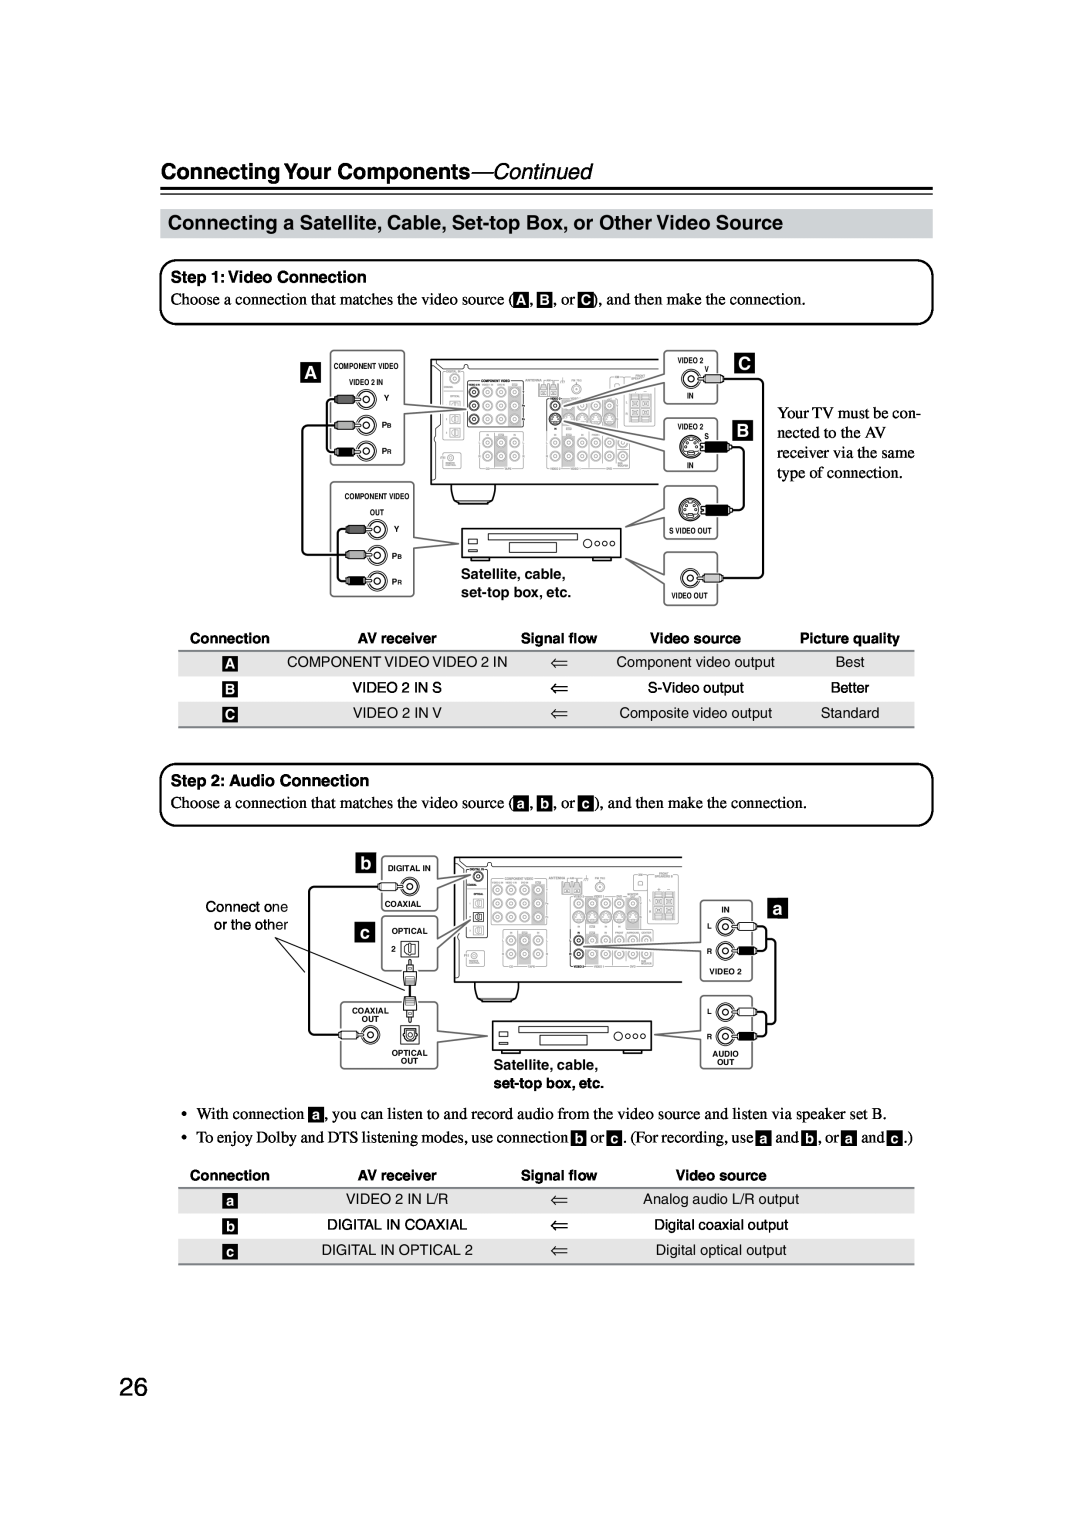 Onkyo TX-SR573 instruction manual Connecting Your Components—Continued, With connection 